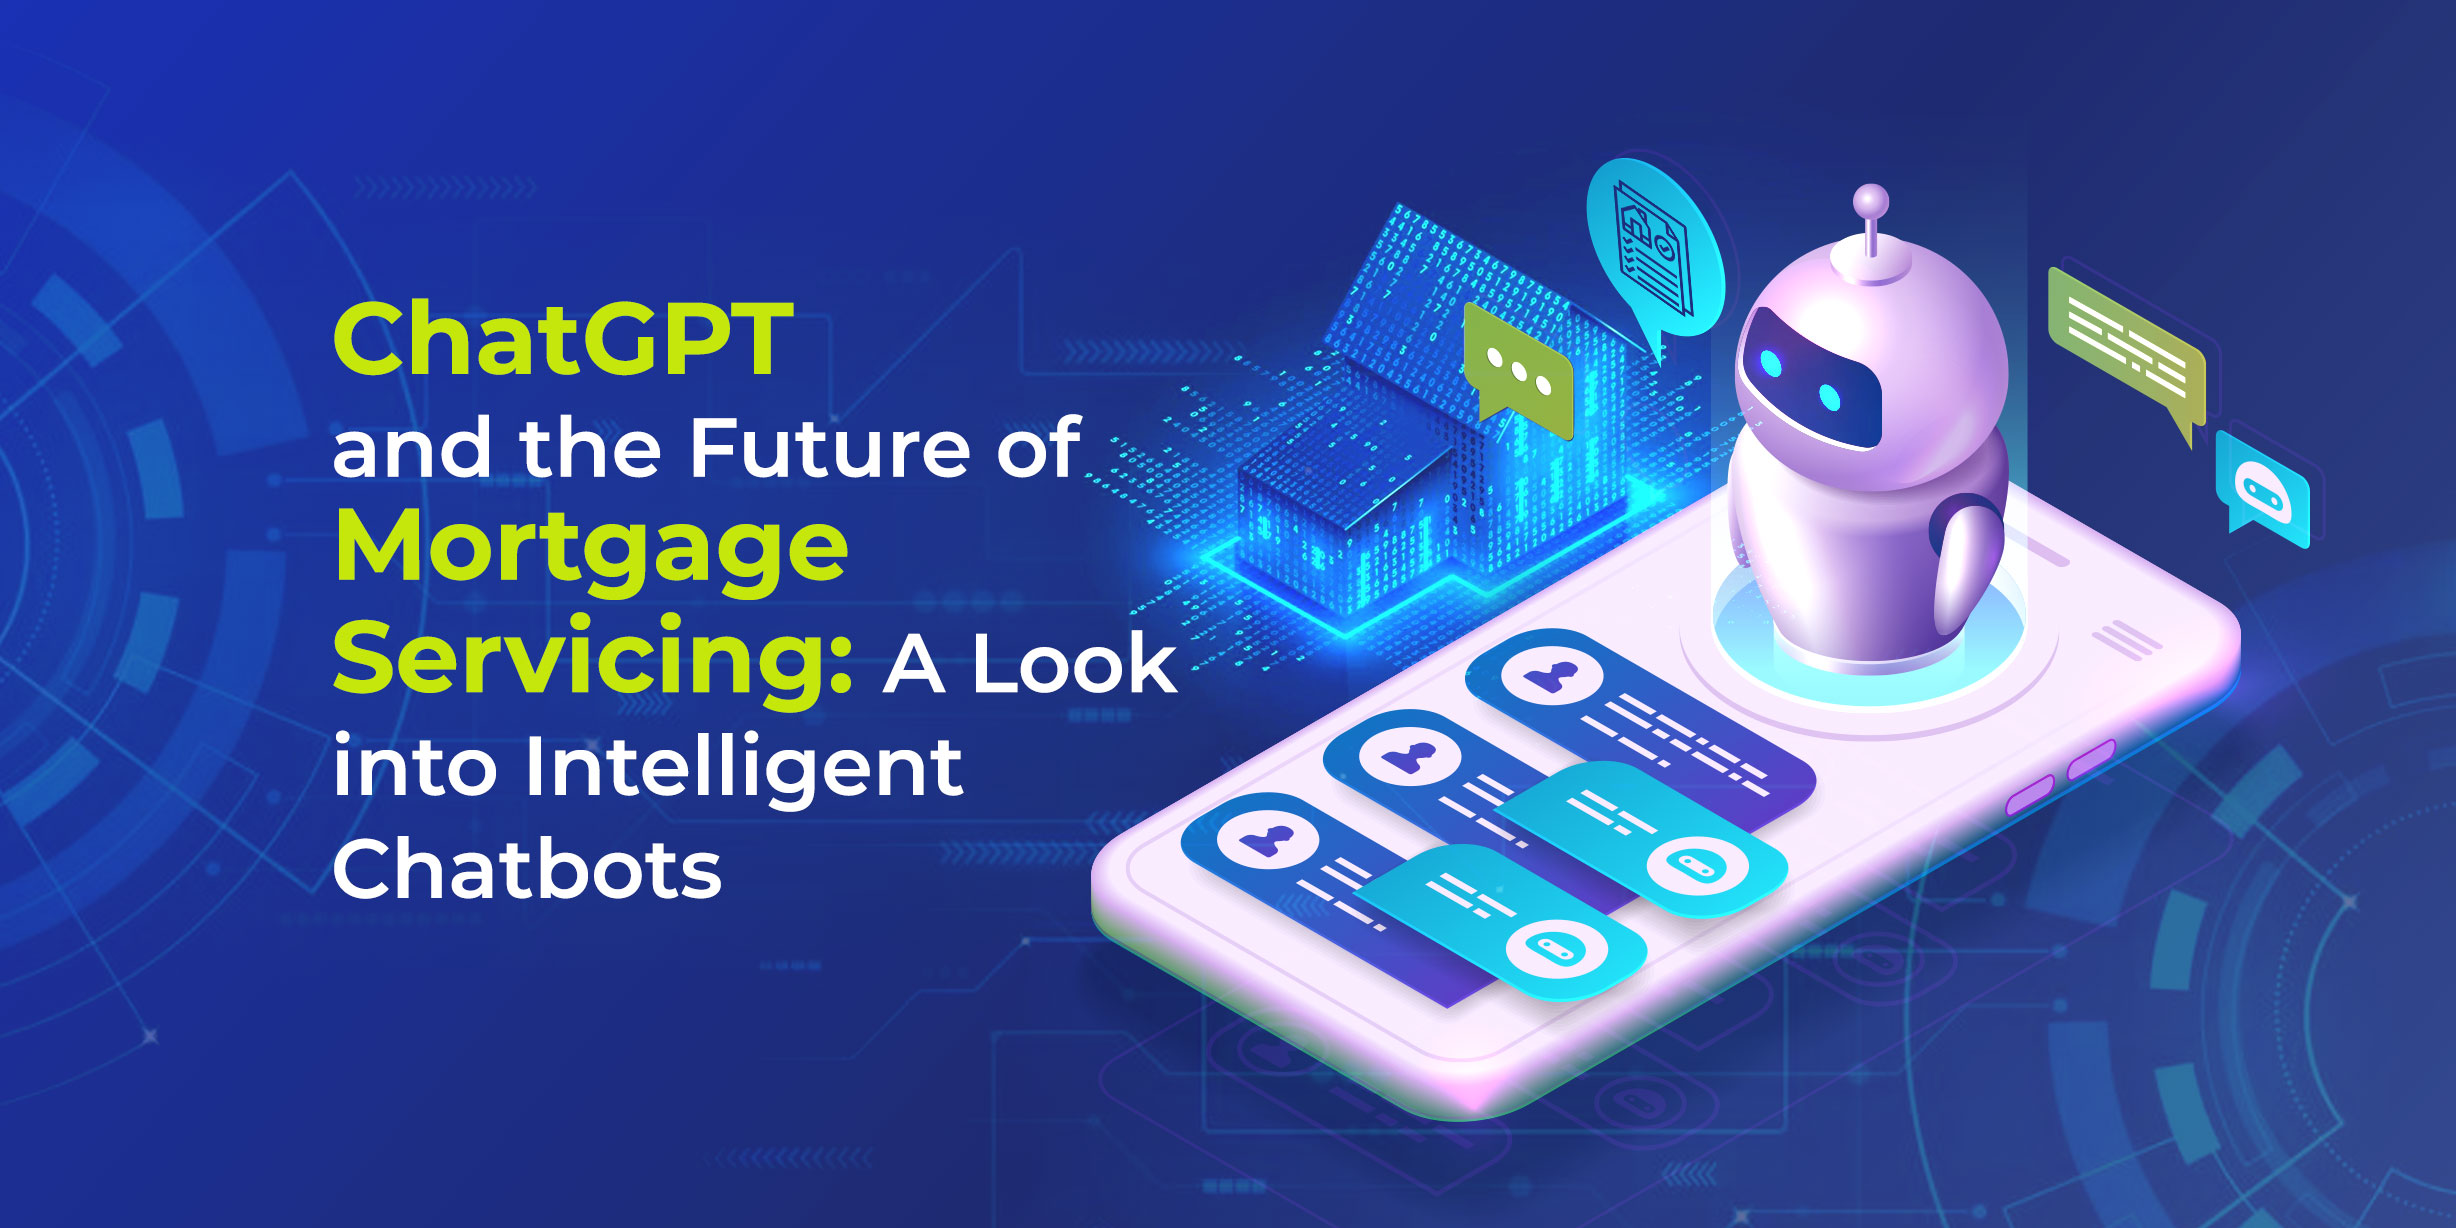 ChatGPT and the Future of Mortgage Servicing: A Look into Intelligent Chatbots